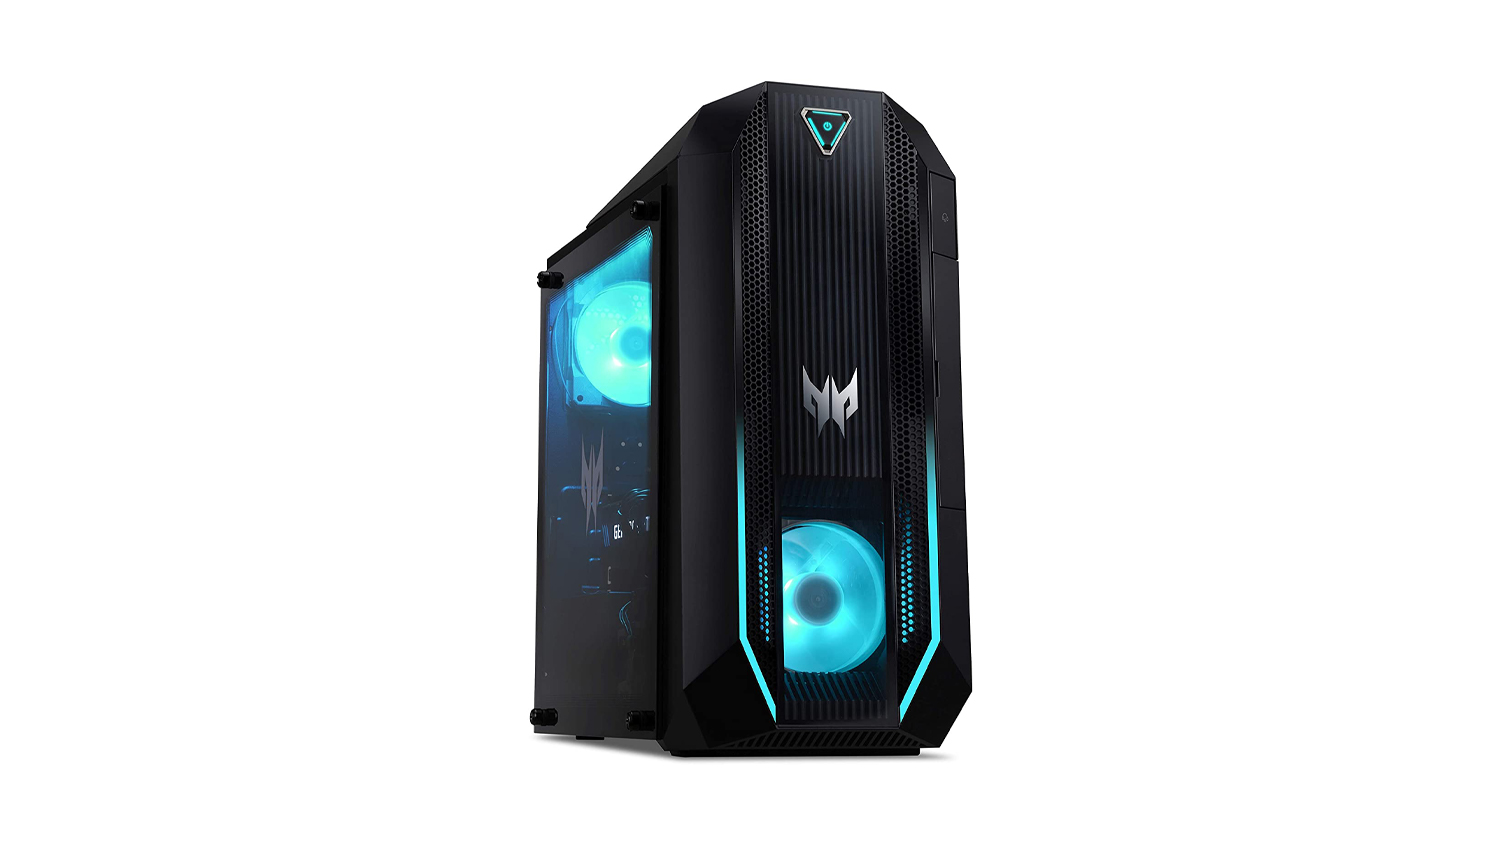 Acer Predator Orion 3000 showcasing its RGB lighting on a white background